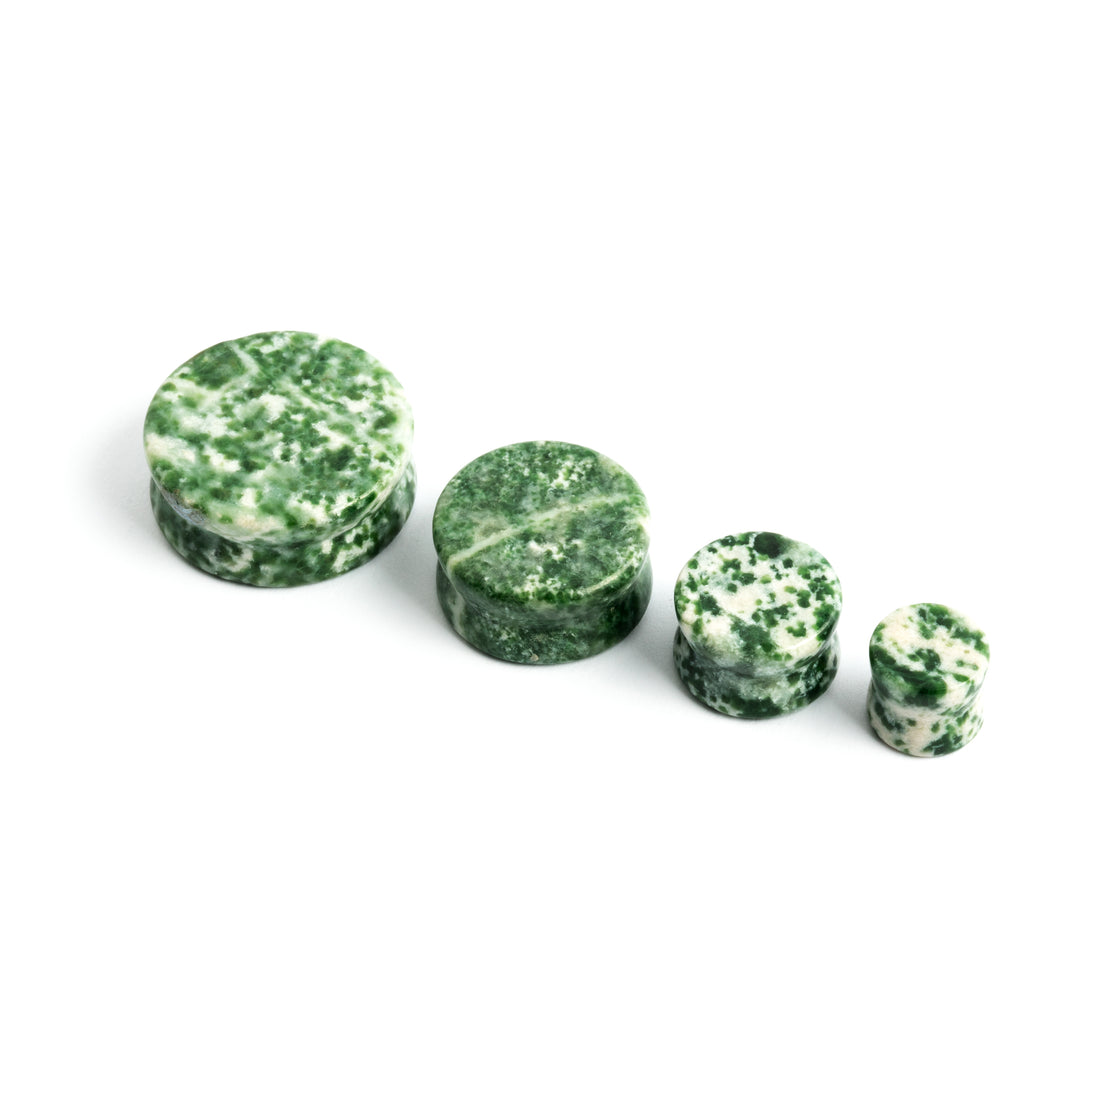 several sizes of double flare Tree Agate sone ear plugs front and side view